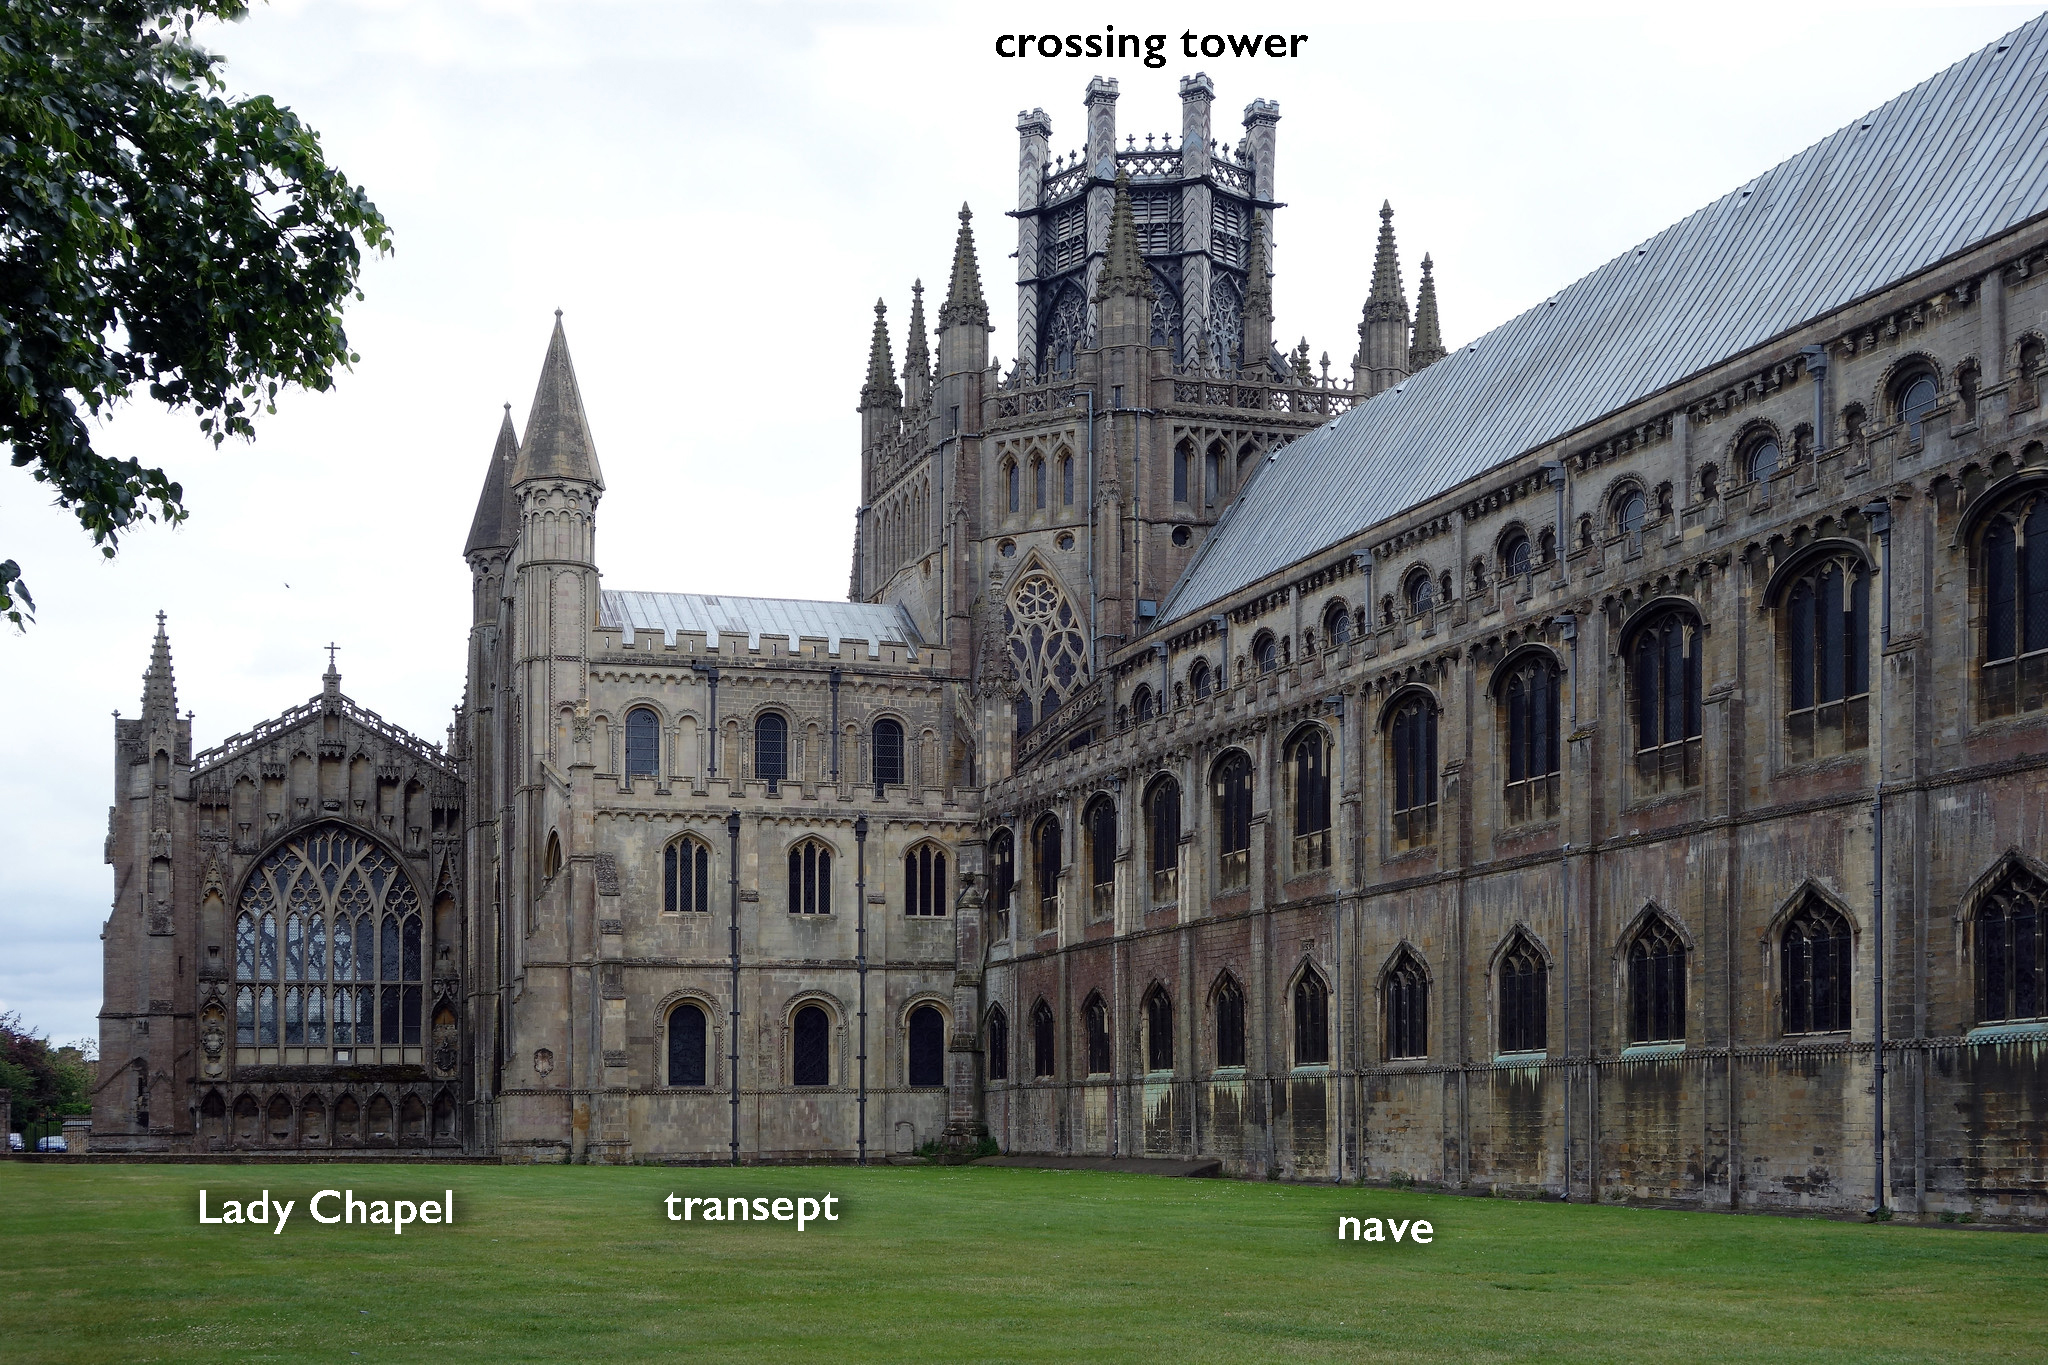 View of the Lady Chapel, northeast transept, nave, and the Octagon (crossing tower), Ely Cathedral, Cambridgeshire, England, founded by Princess Æthelthryth (also Etheldreda) in 672 (photo: Steven Zucker, CC BY-NC-SA 2.0) 